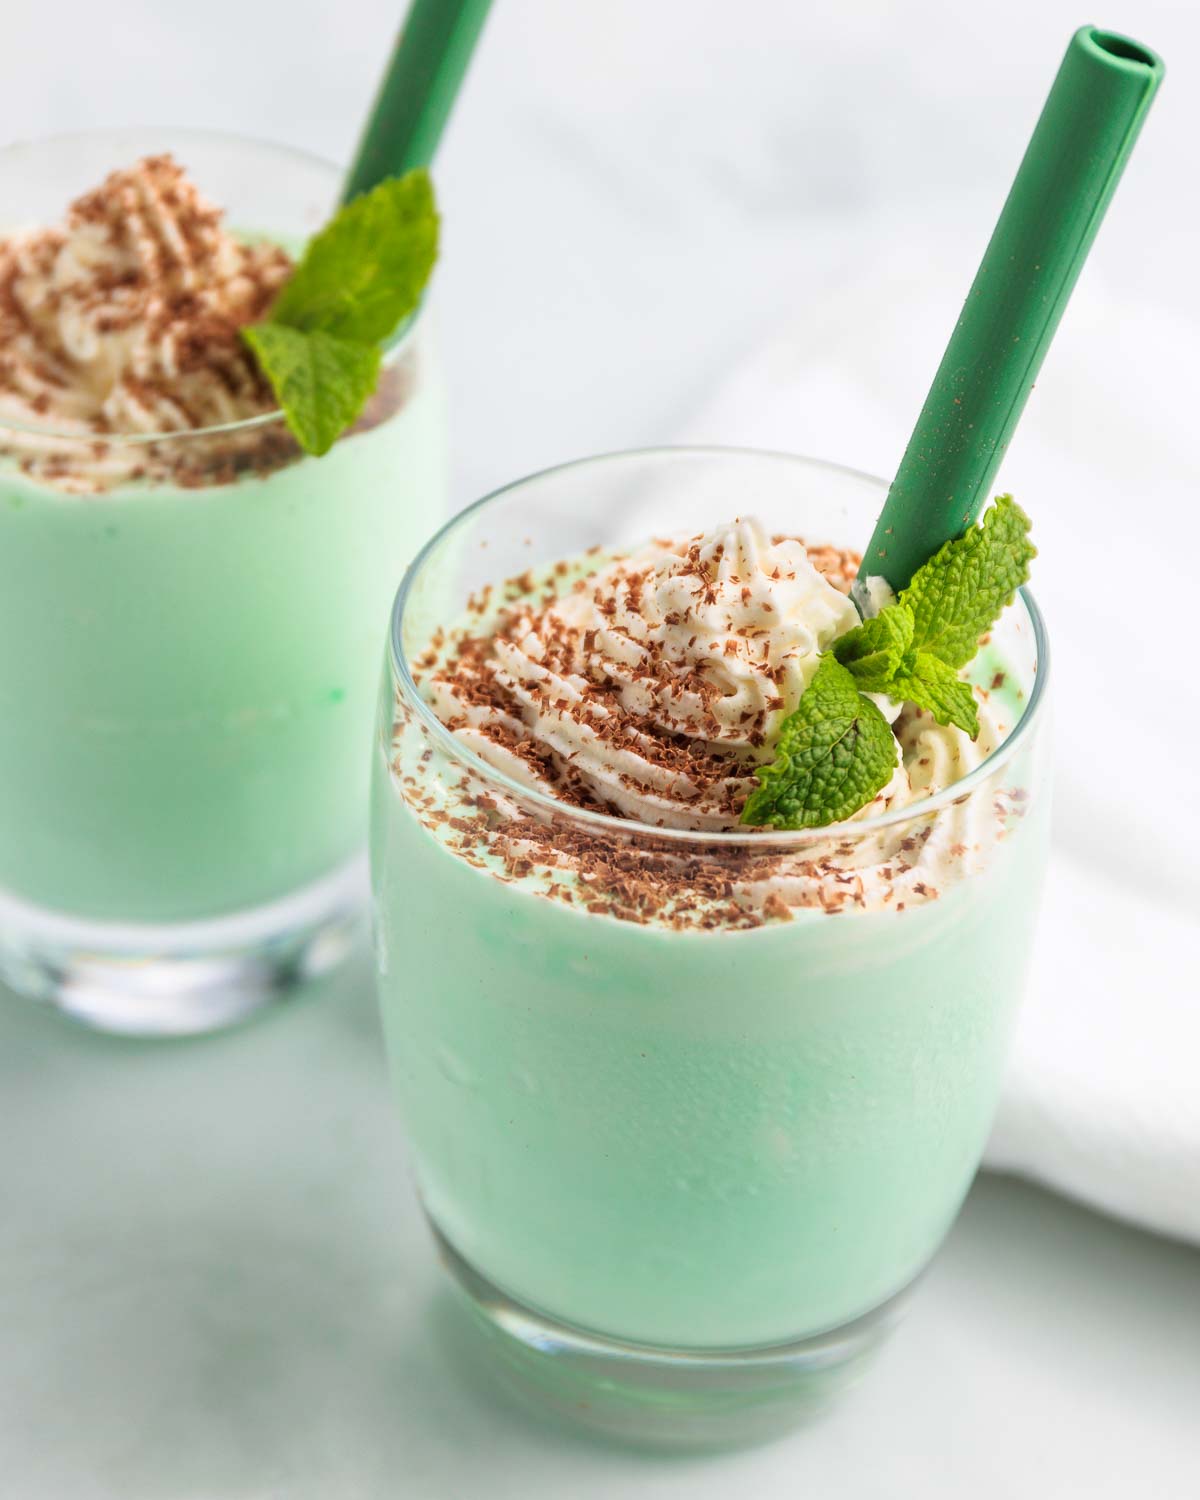 Two keto Shamrock milkshakes with whipped cream and chocolate shavings on top and a green straw.